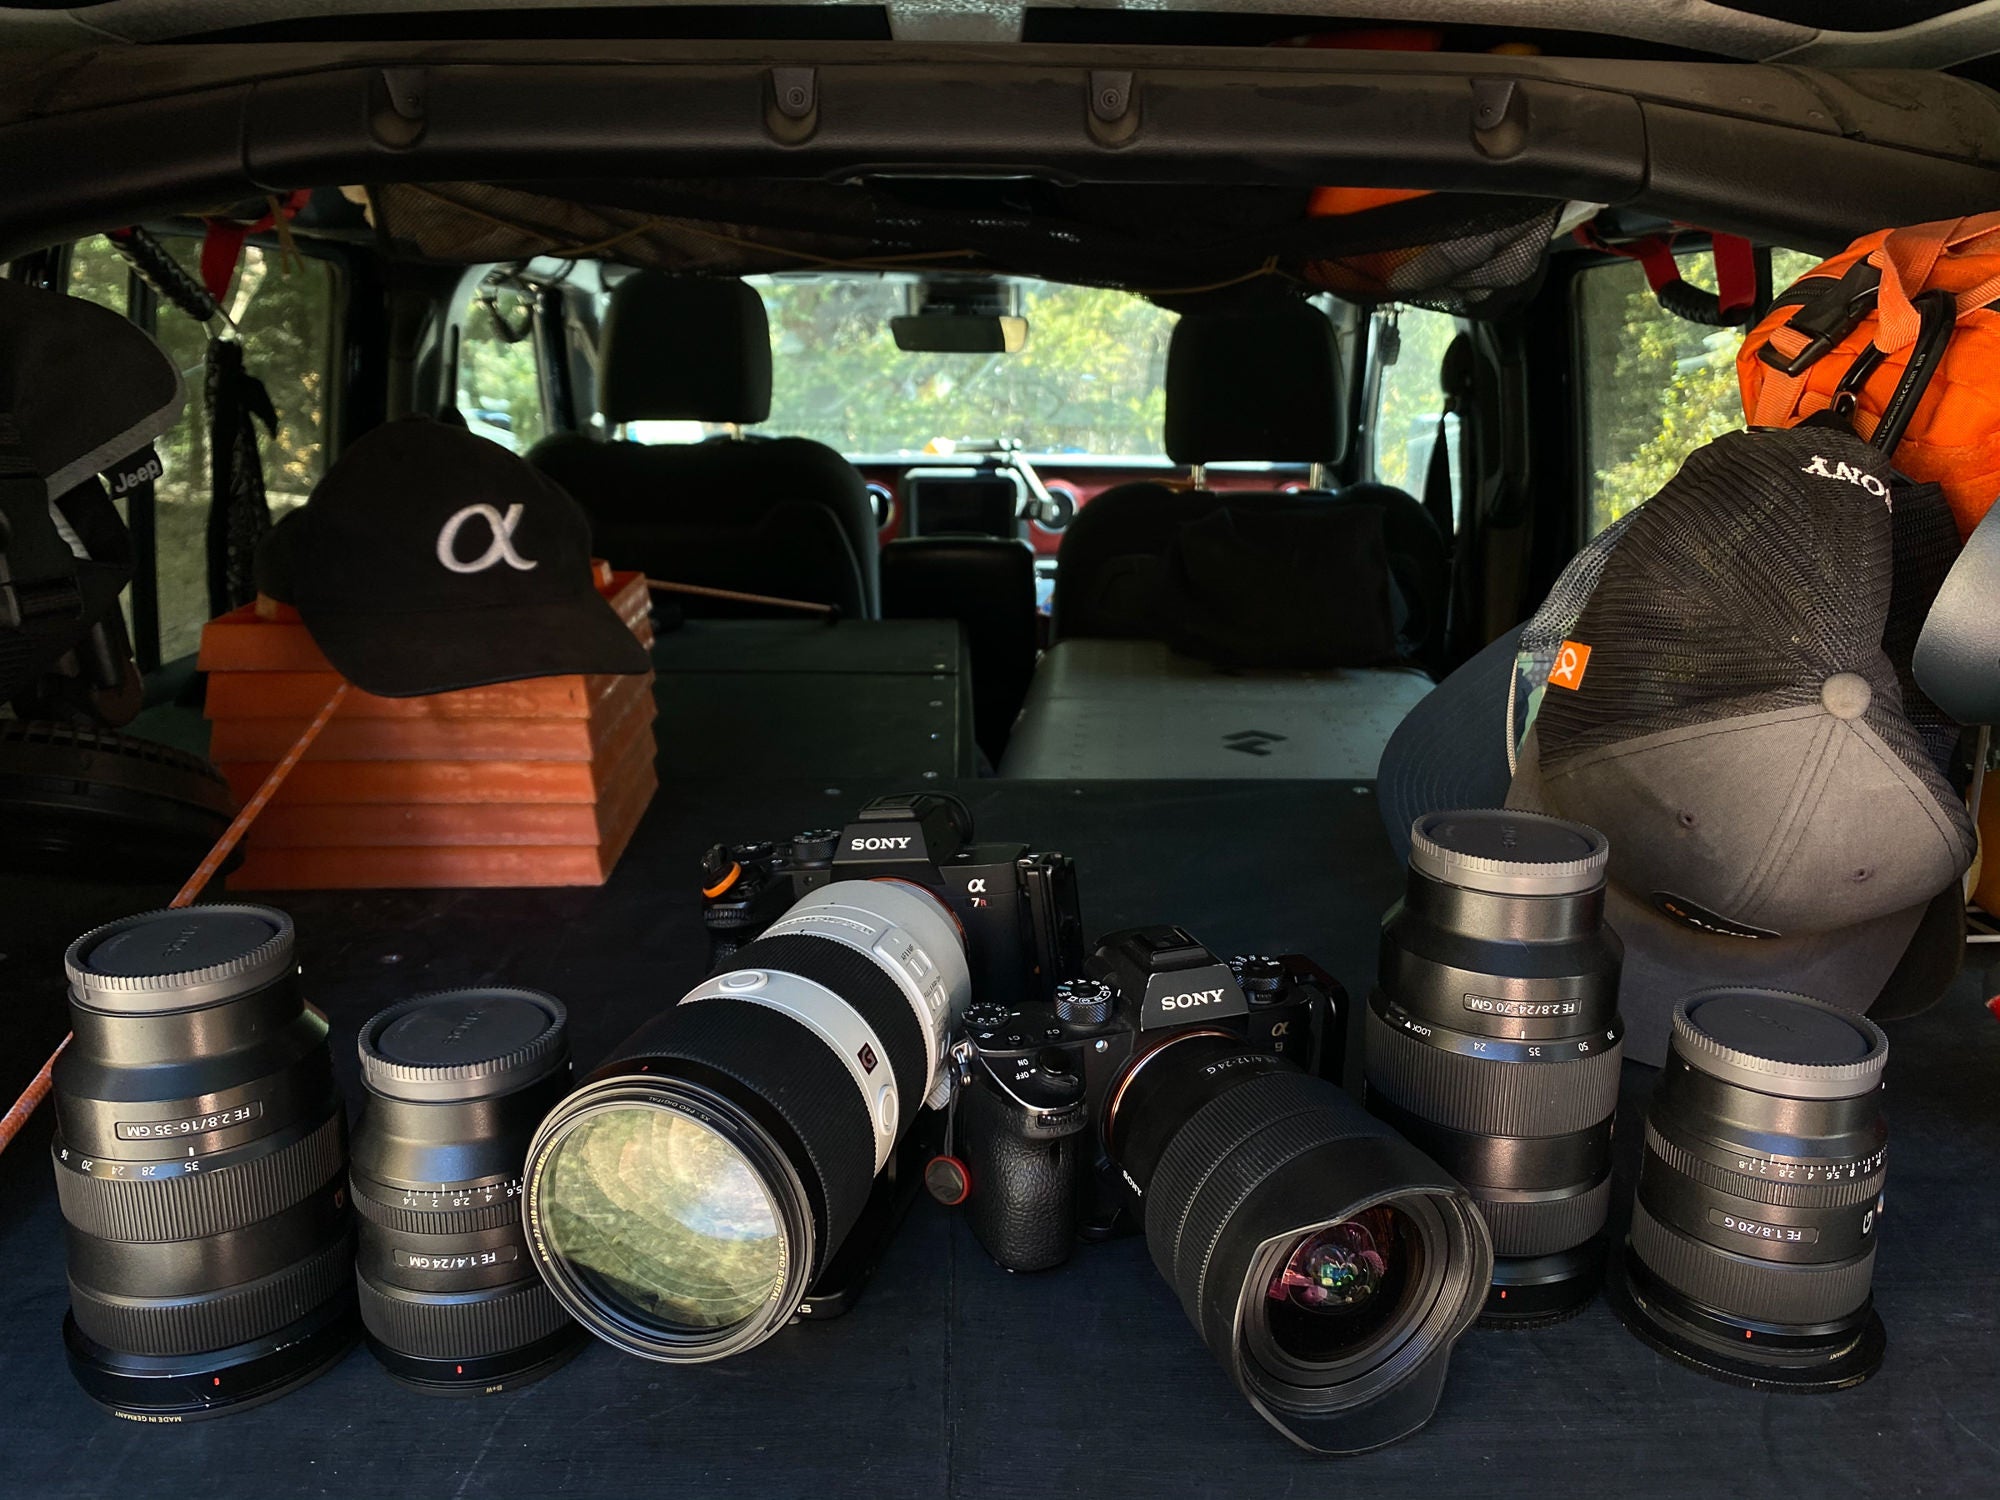 Lawrence Leyderman's overlanding photography gear in his Jeep